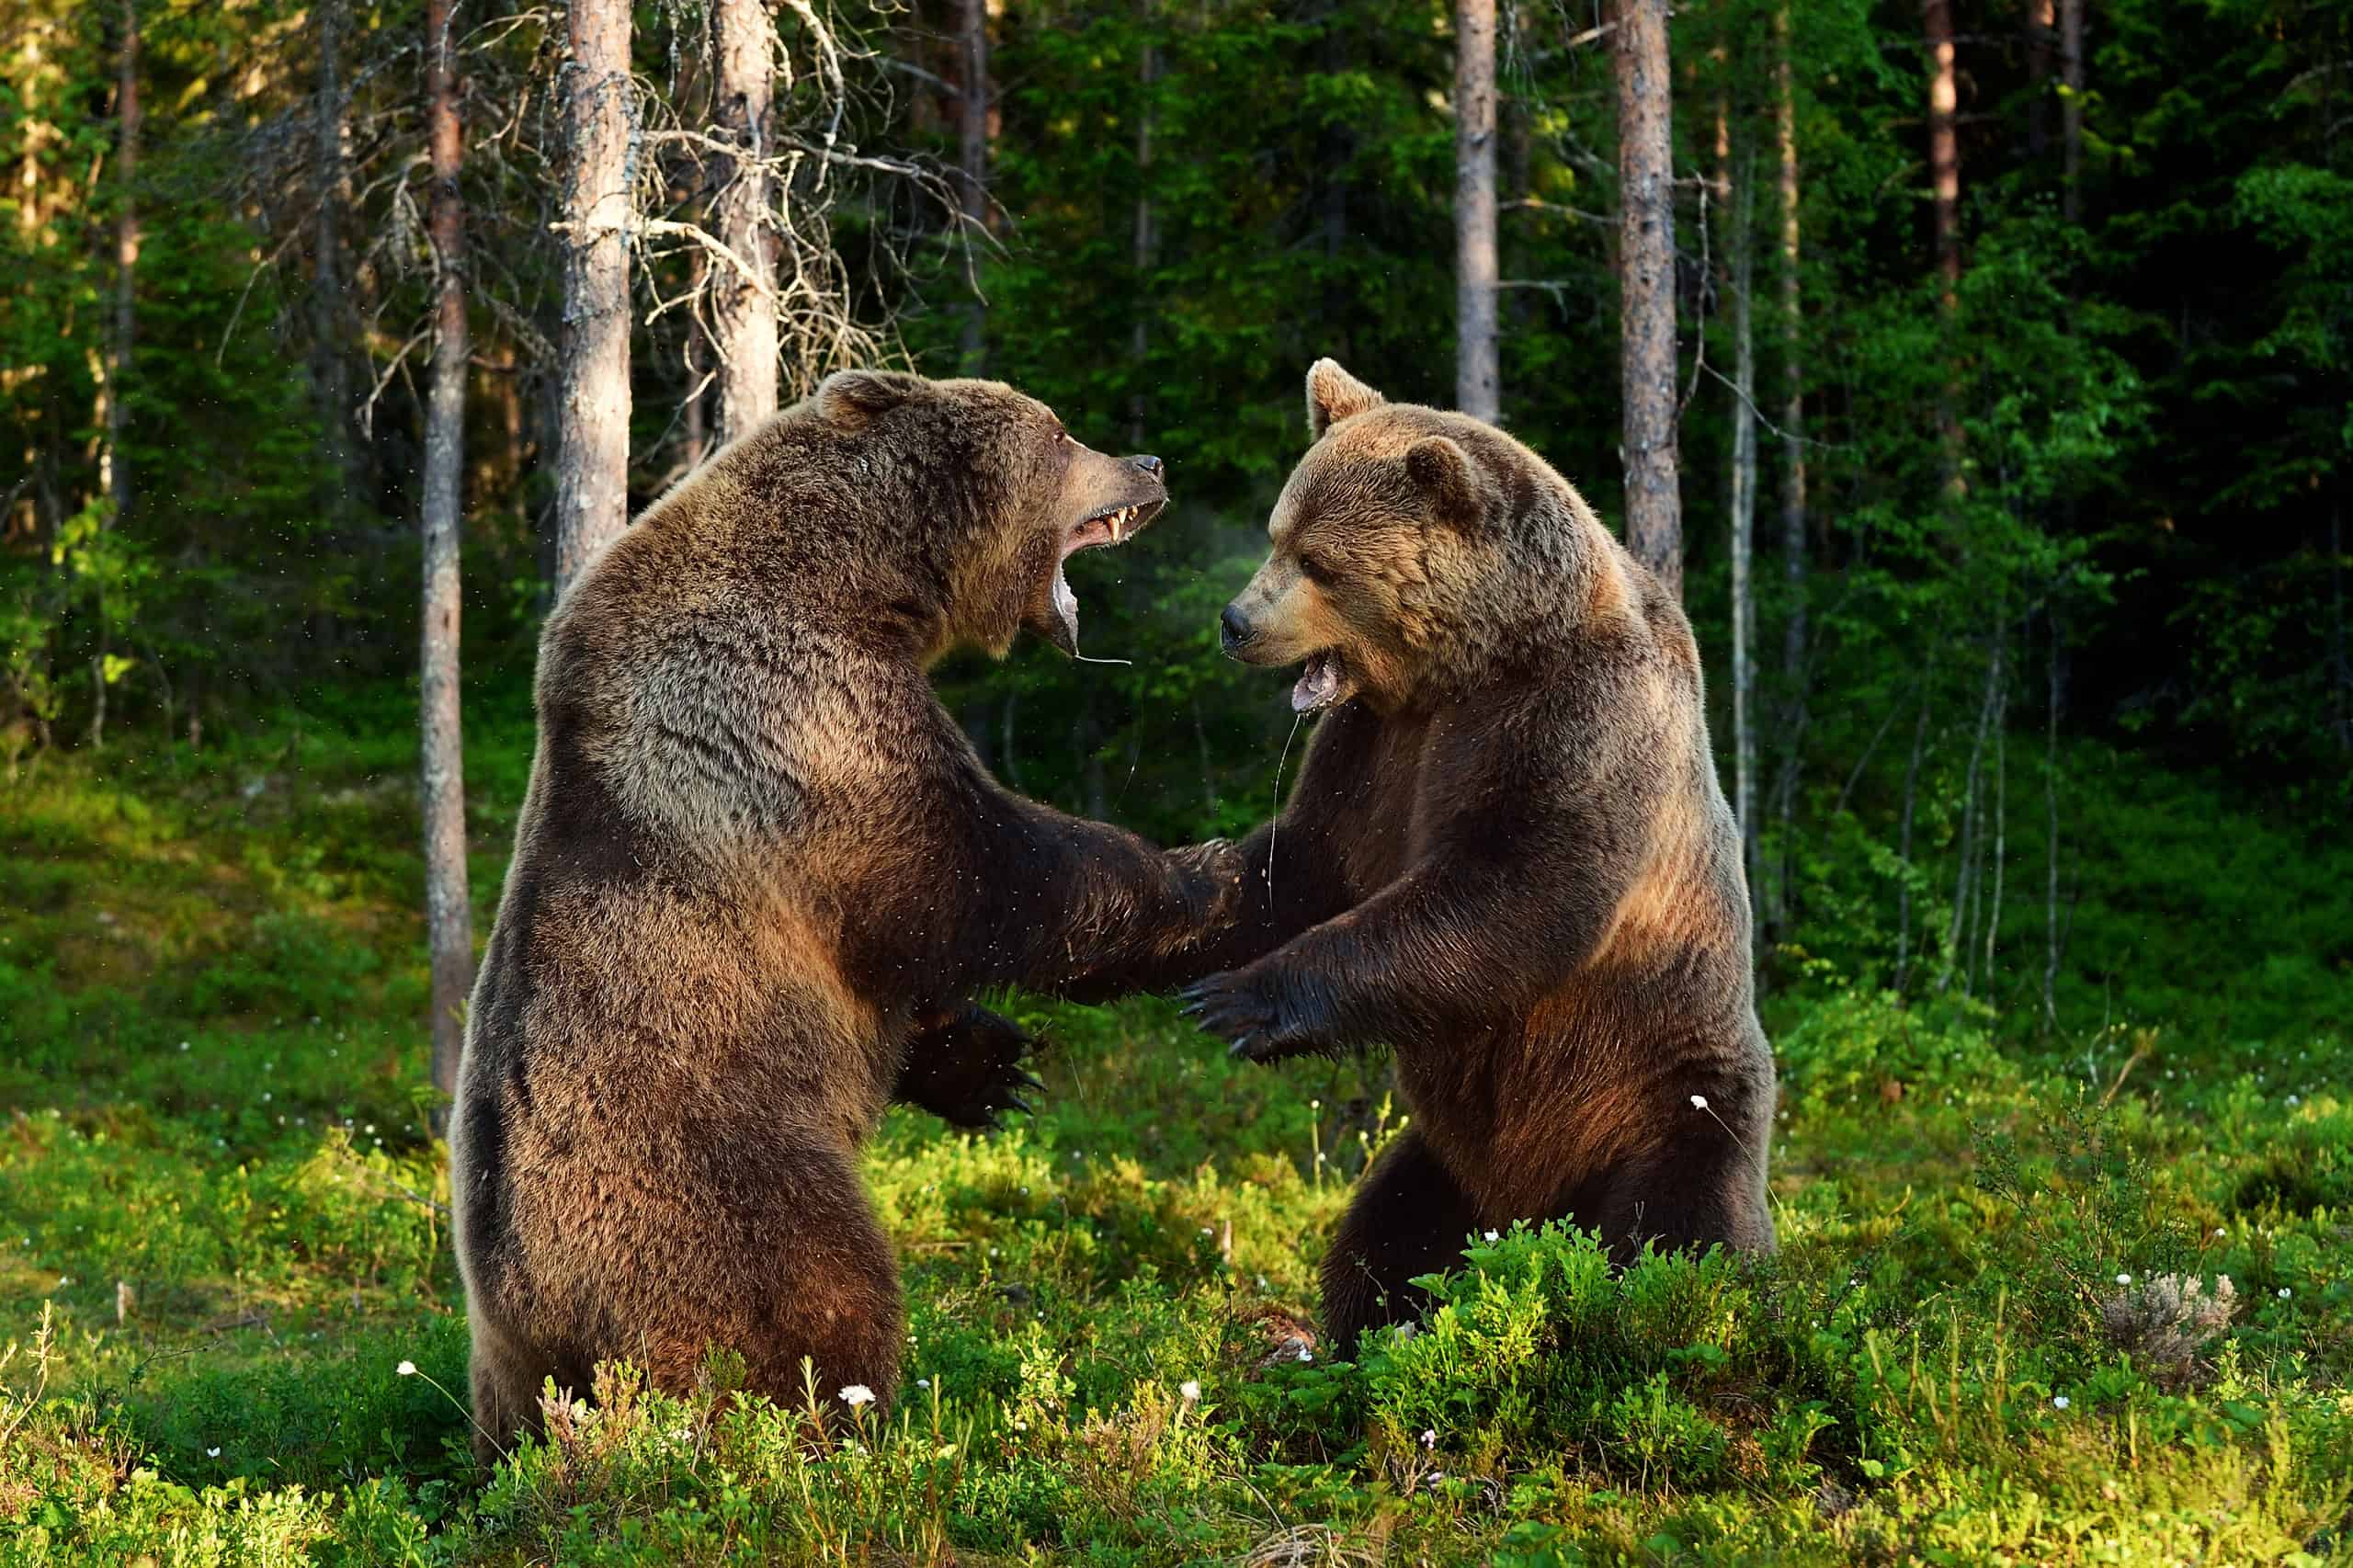 man fights bear for salmon